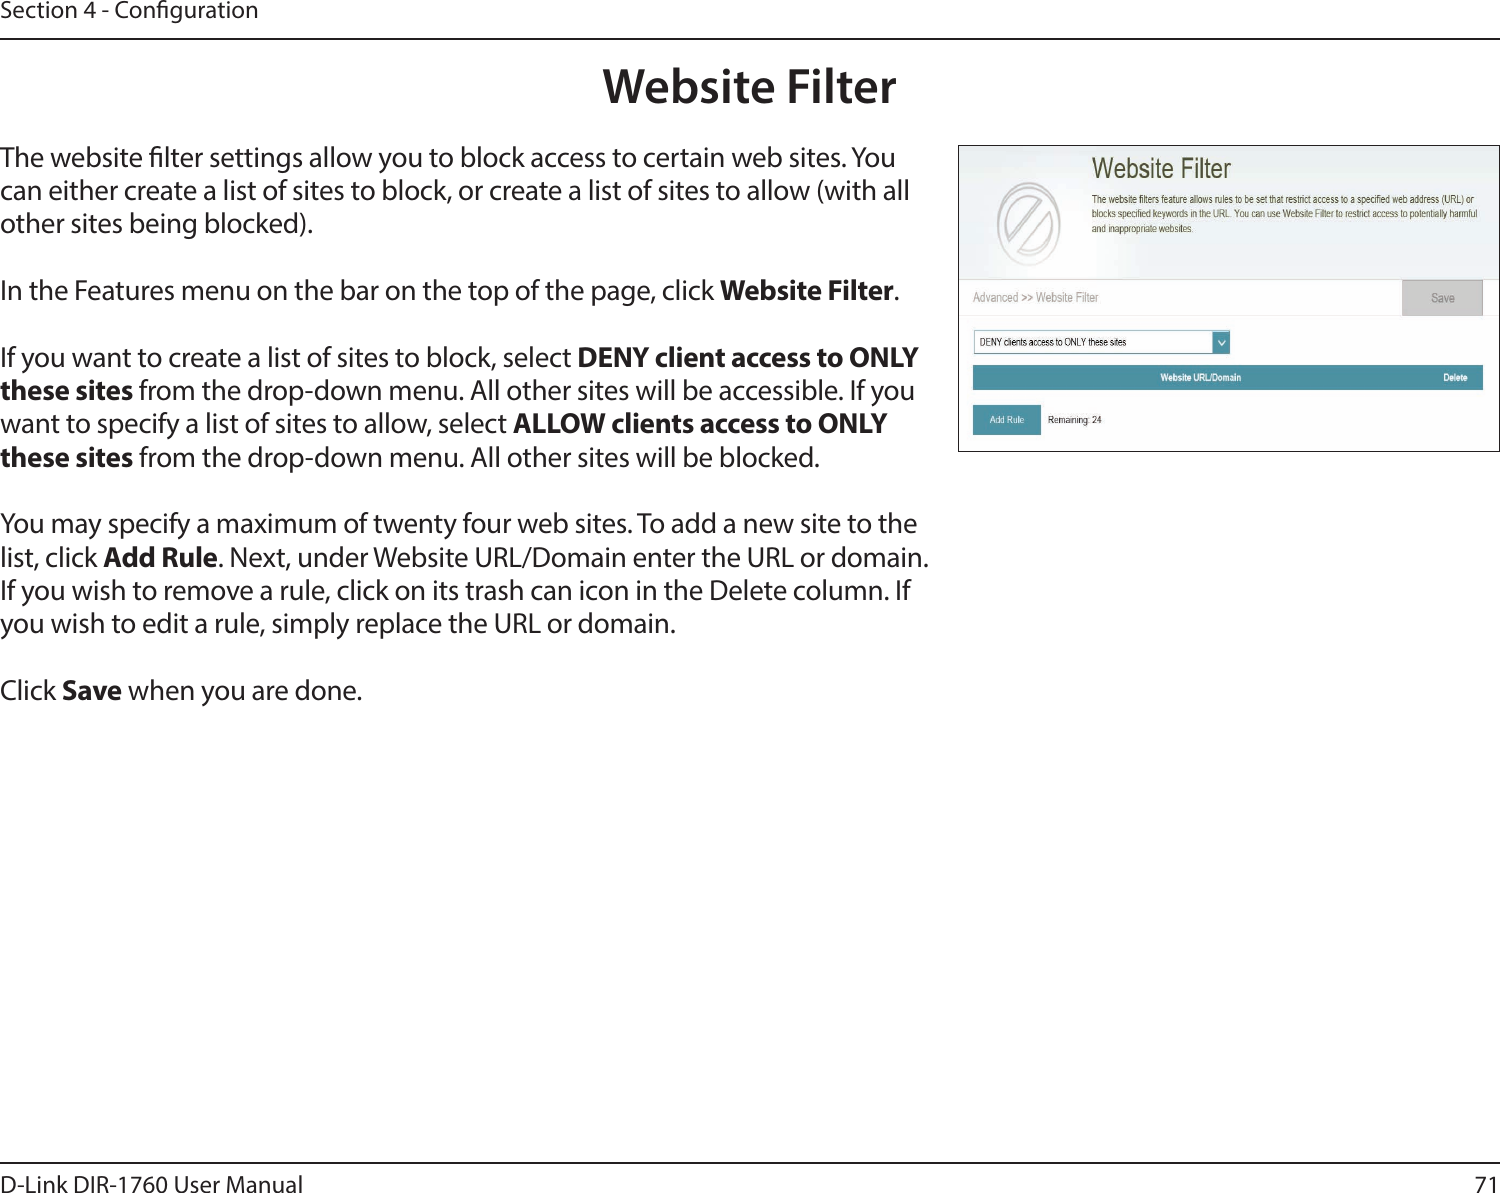 71D-Link DIR-1760 User ManualSection 4 - CongurationWebsite FilterThe website lter settings allow you to block access to certain web sites. You can either create a list of sites to block, or create a list of sites to allow (with all other sites being blocked).In the Features menu on the bar on the top of the page, click Website Filter.If you want to create a list of sites to block, select DENY client access to ONLY these sites from the drop-down menu. All other sites will be accessible. If you want to specify a list of sites to allow, select ALLOW clients access to ONLY these sites from the drop-down menu. All other sites will be blocked.You may specify a maximum of twenty four web sites. To add a new site to the list, click Add Rule. Next, under Website URL/Domain enter the URL or domain. If you wish to remove a rule, click on its trash can icon in the Delete column. If you wish to edit a rule, simply replace the URL or domain.Click Save when you are done.